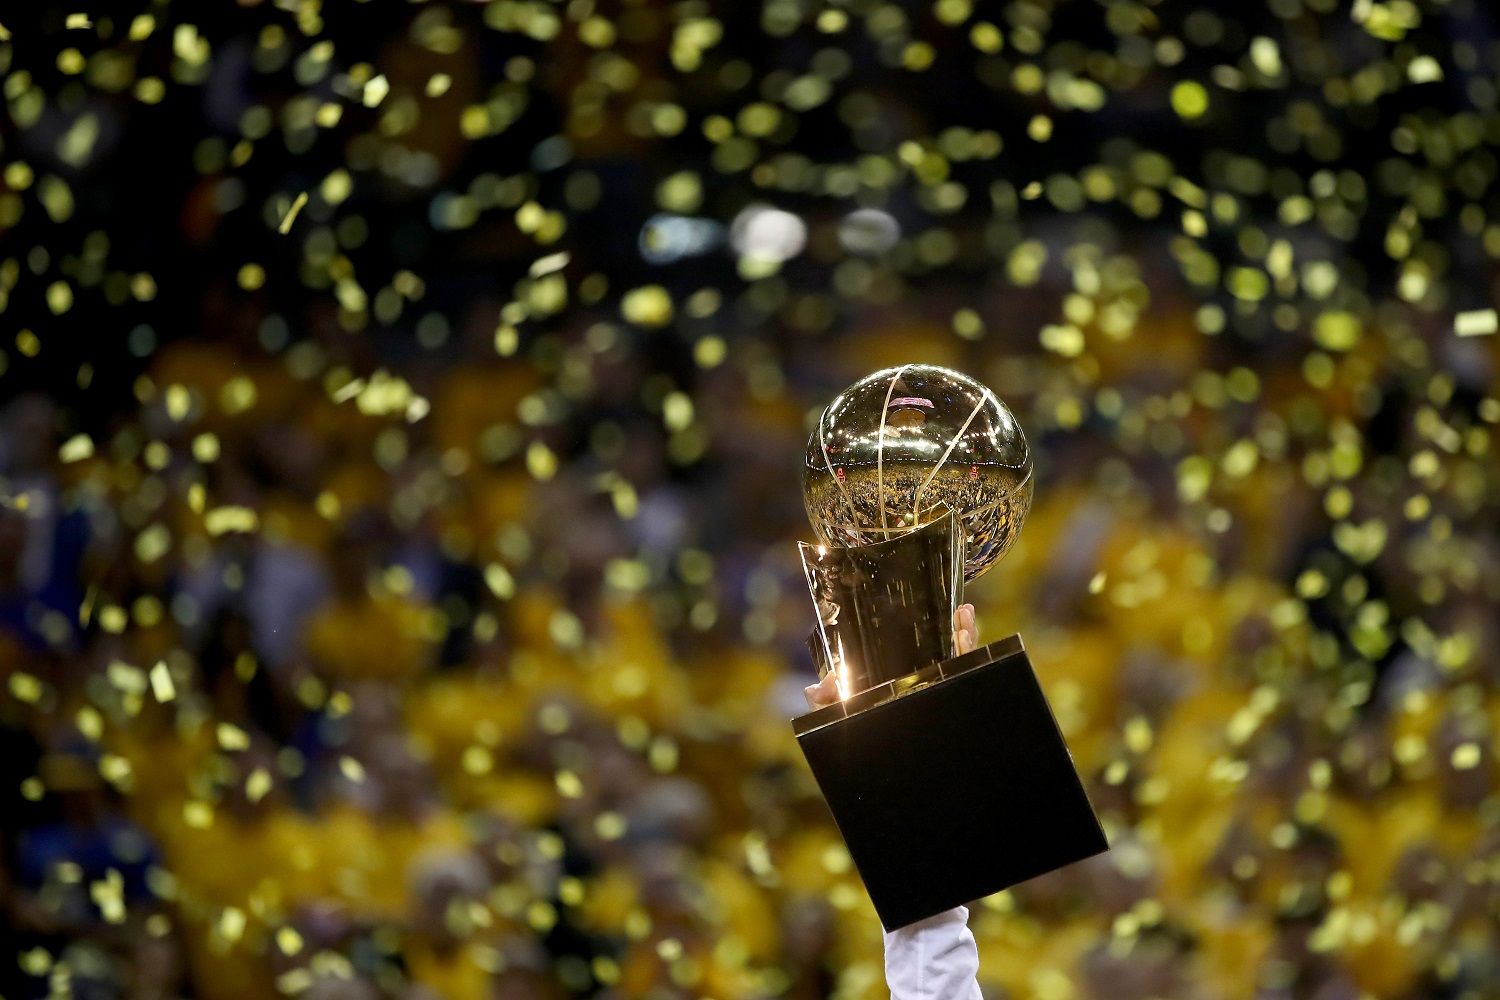 OAKLAND, CA - JUNE 12:  The Larry O'Brien Championship Trophy is held following the Golden State Warriors 129-120 win over the Cleveland Cavaliers in Game 5 to win the 2017 NBA Finals at ORACLE Arena on June 12, 2017 in Oakland, California. NOTE TO USER: User expressly acknowledges and agrees that, by downloading and or using this photograph, User is consenting to the terms and conditions of the Getty Images License Agreement.  (Photo by Ezra Shaw/Getty Images)